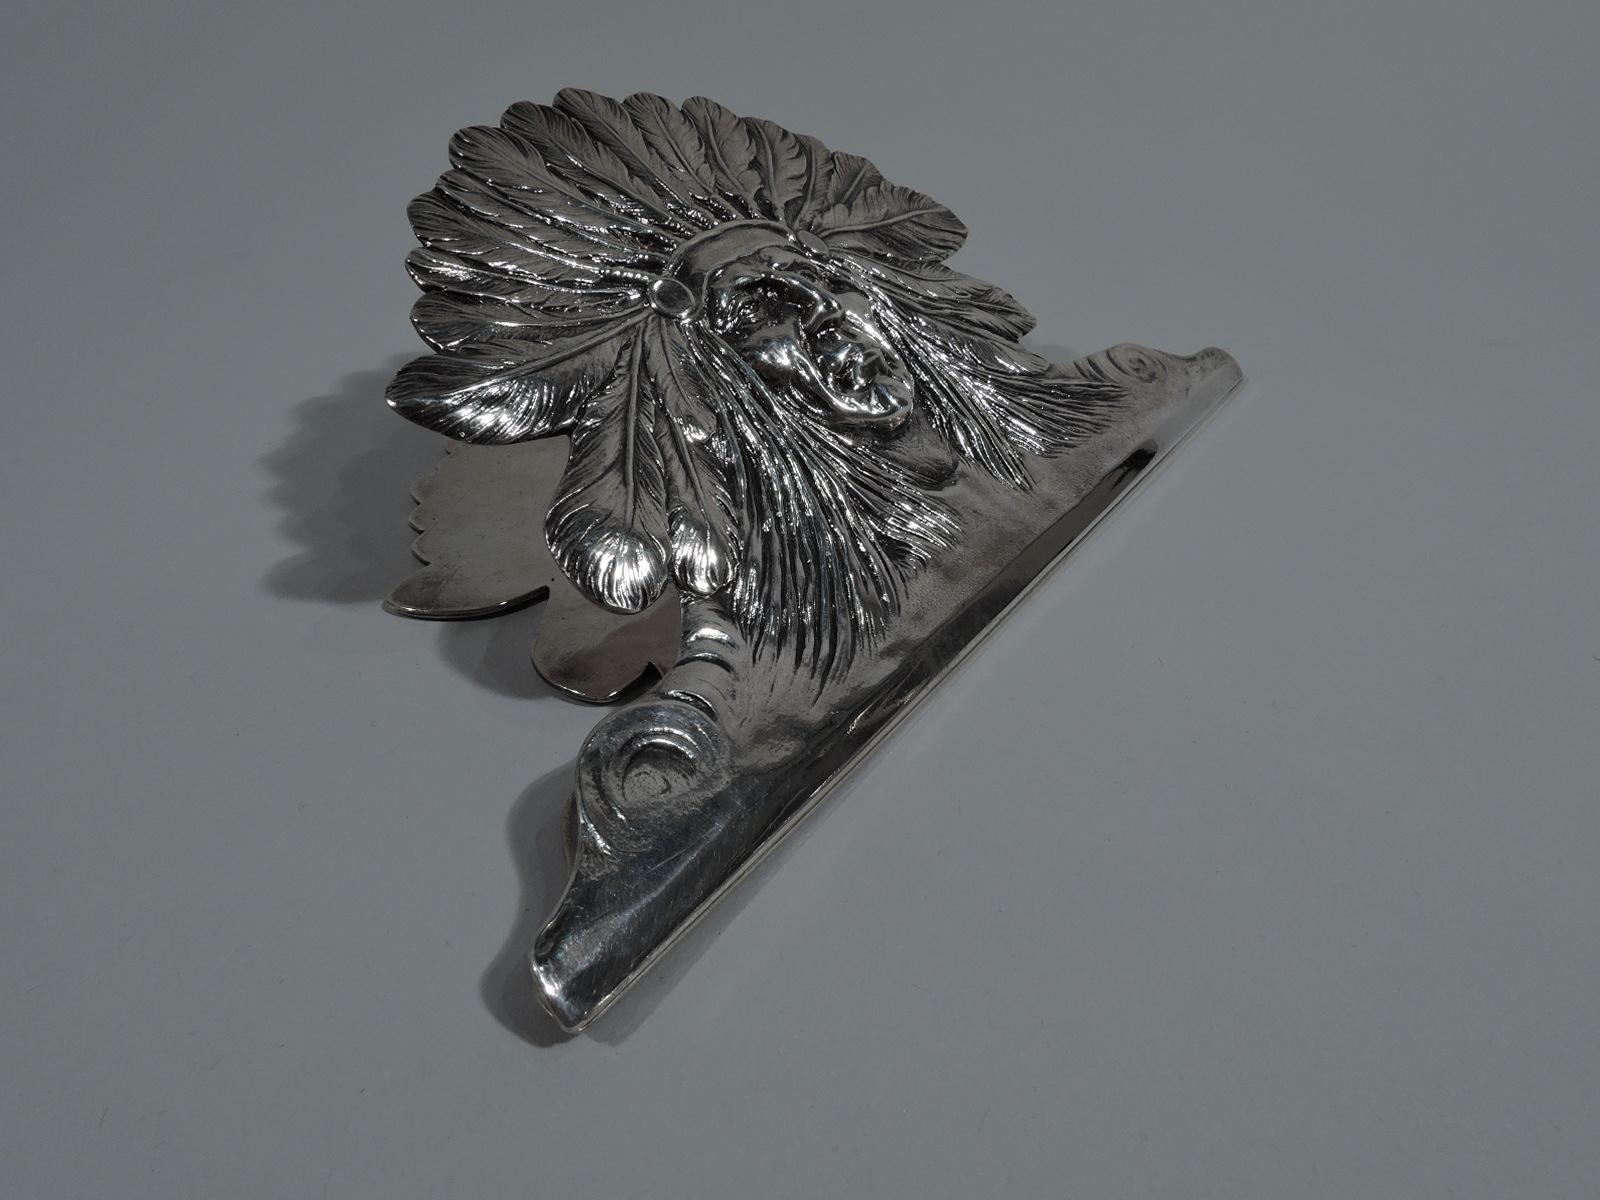 Large American sterling silver novelty paper clip, circa 1900. Clip front in form of Indian chief head with feathered headdress and stern visage. Back plain. Adds a touch of adventure to bill paying night. Stamped “Sterling”. Weight: 8.5 troy ounces.